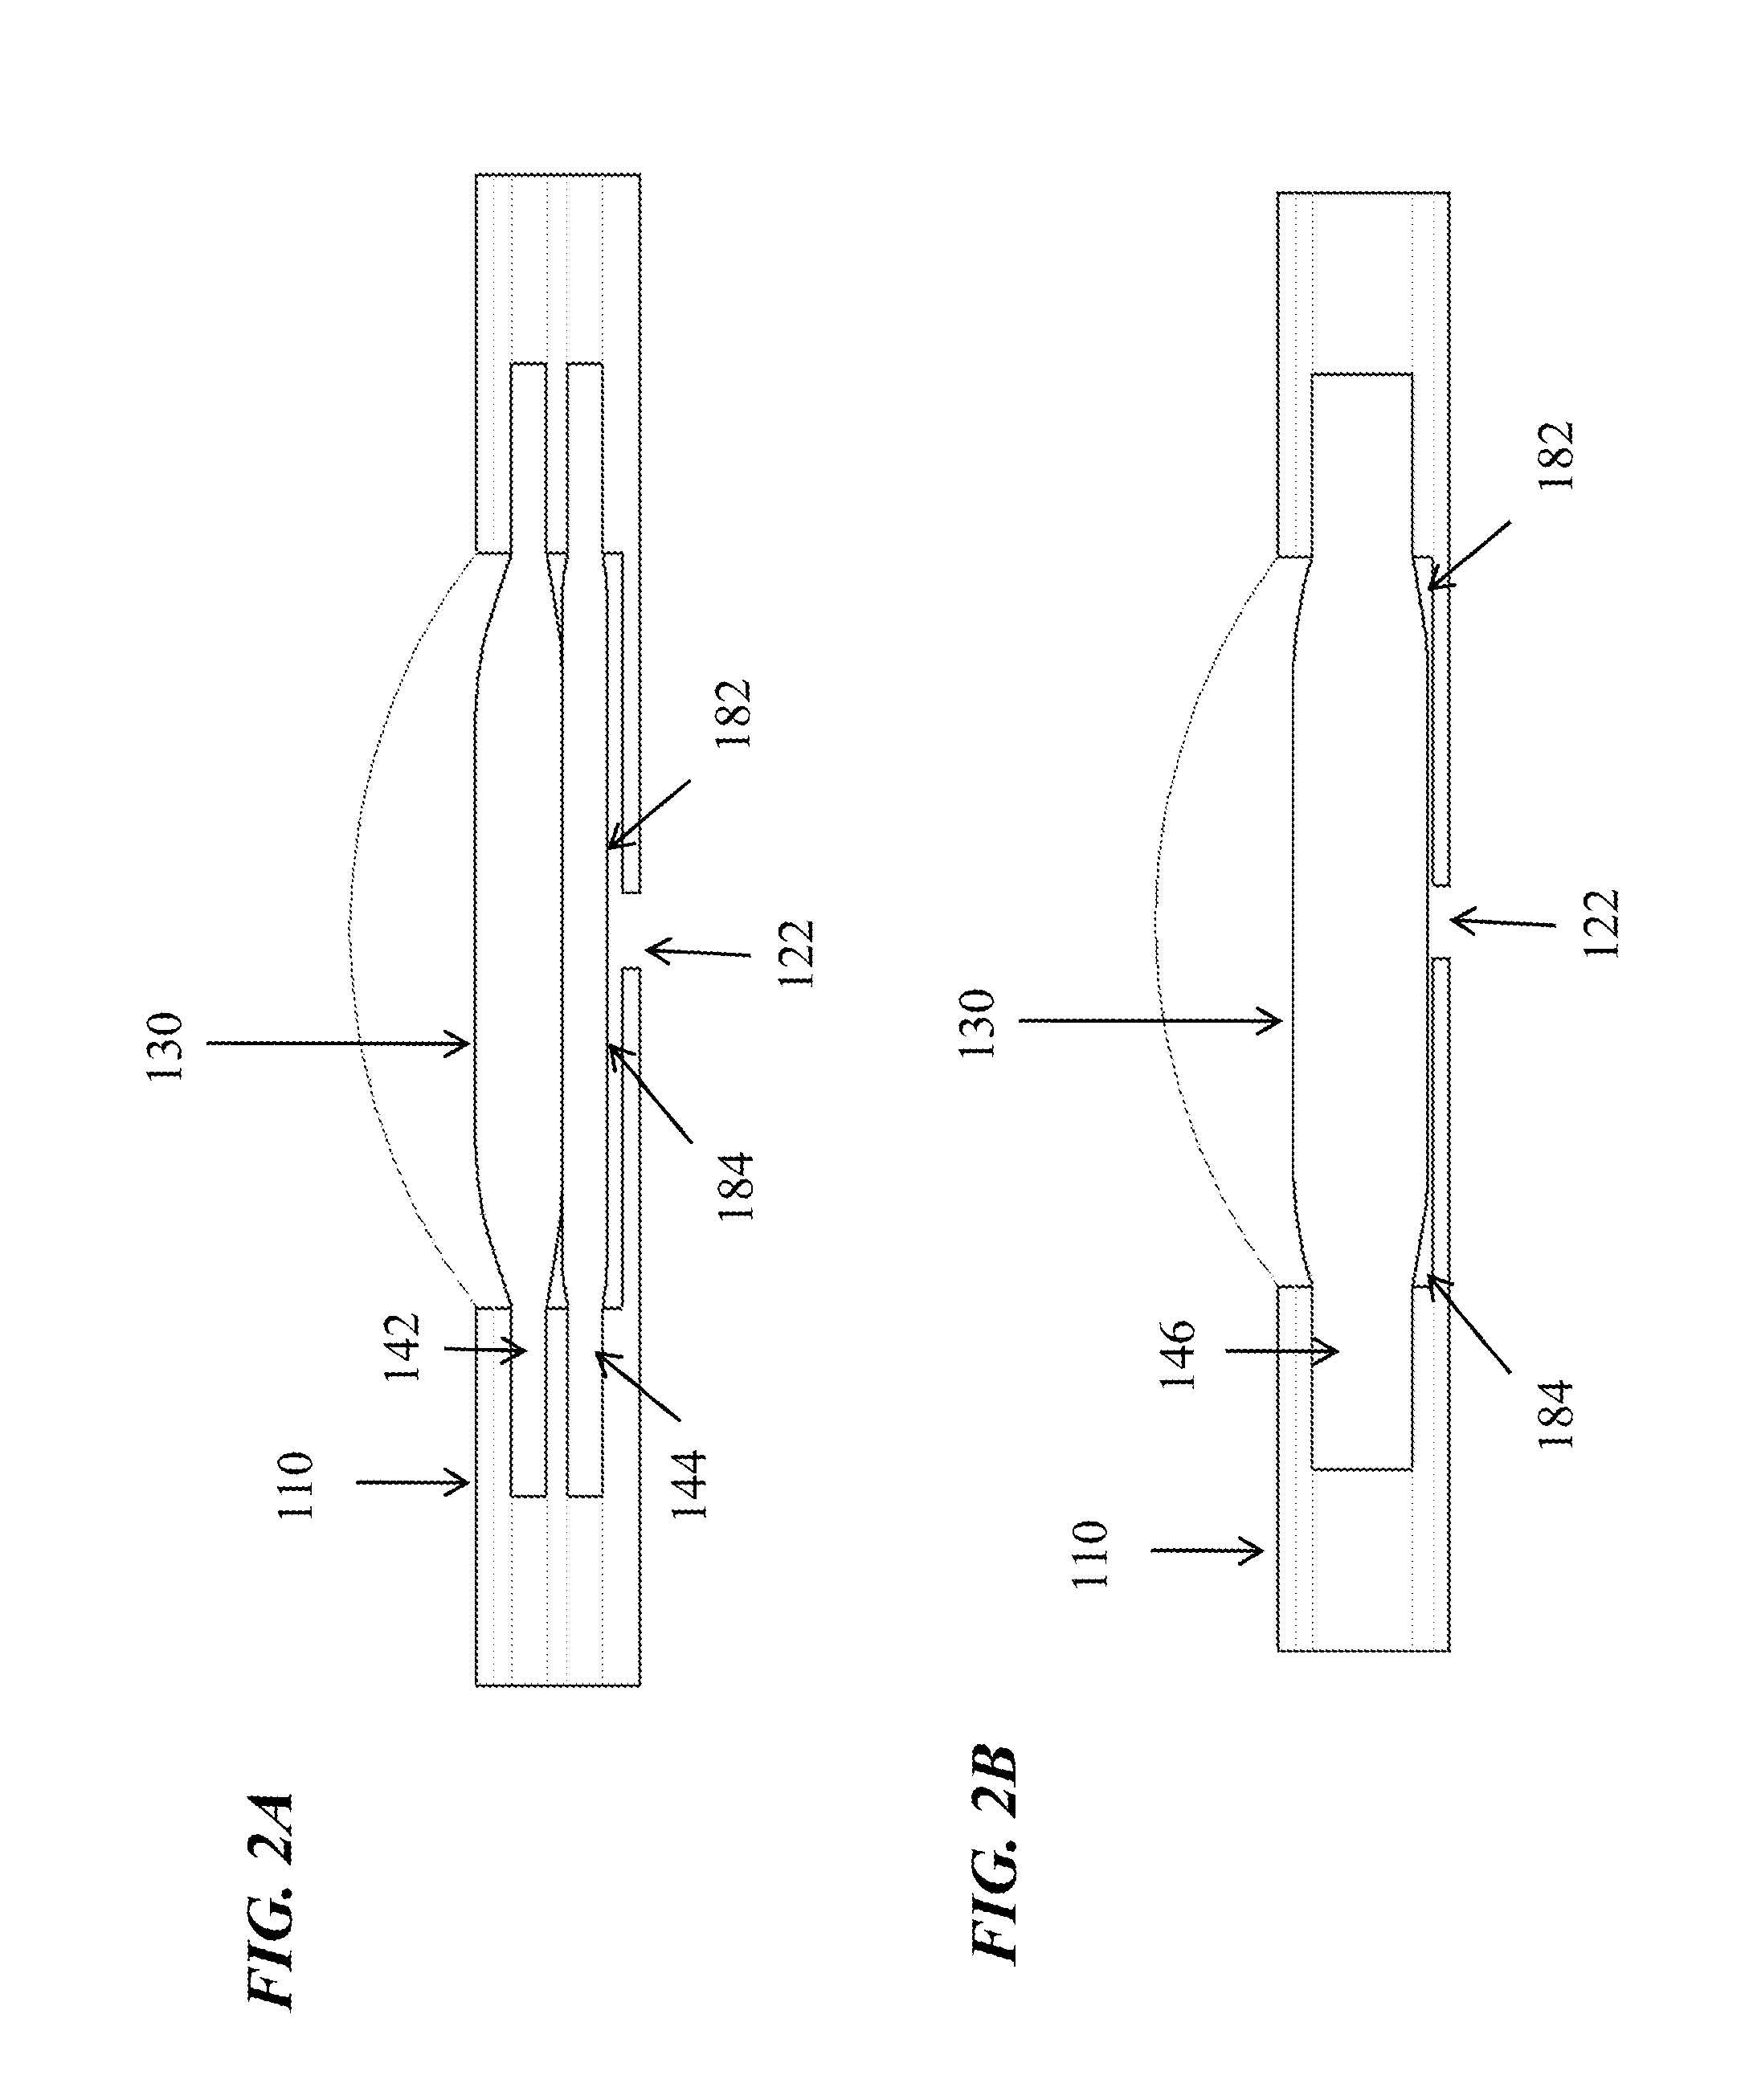 Microfluidic devices and methods for performing serum separation and blood cross-matching